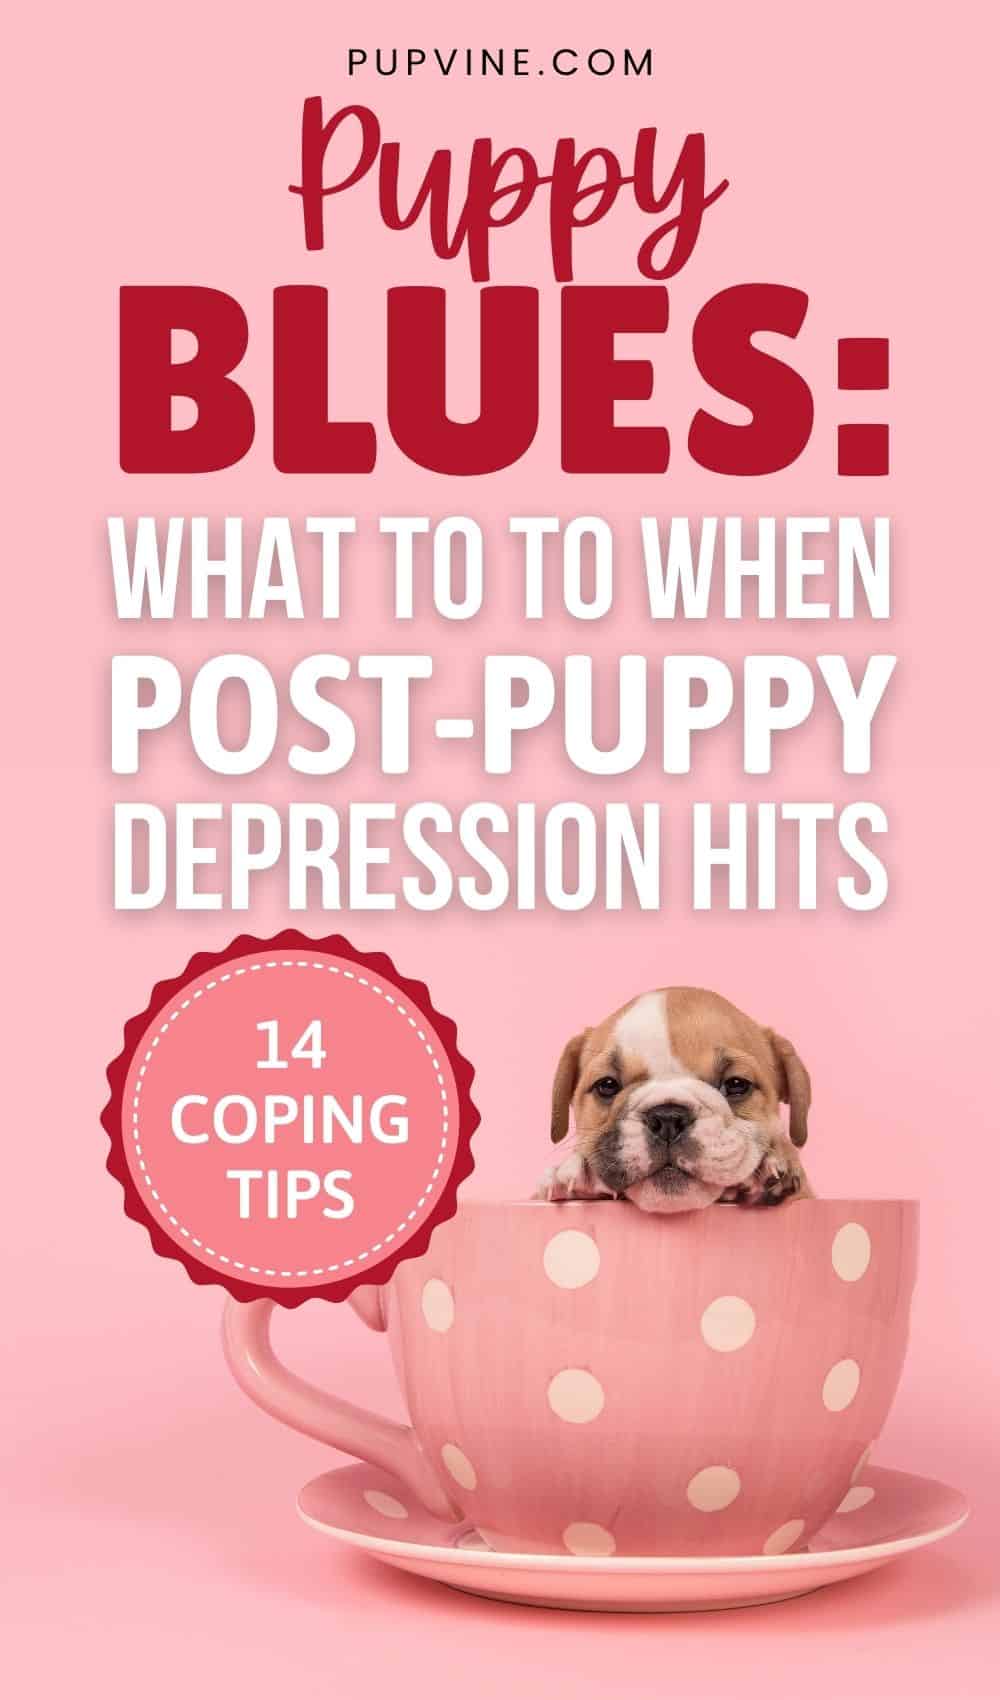 Puppy Blues What To To When Post-Puppy Depression Hits (14 Coping Tips)